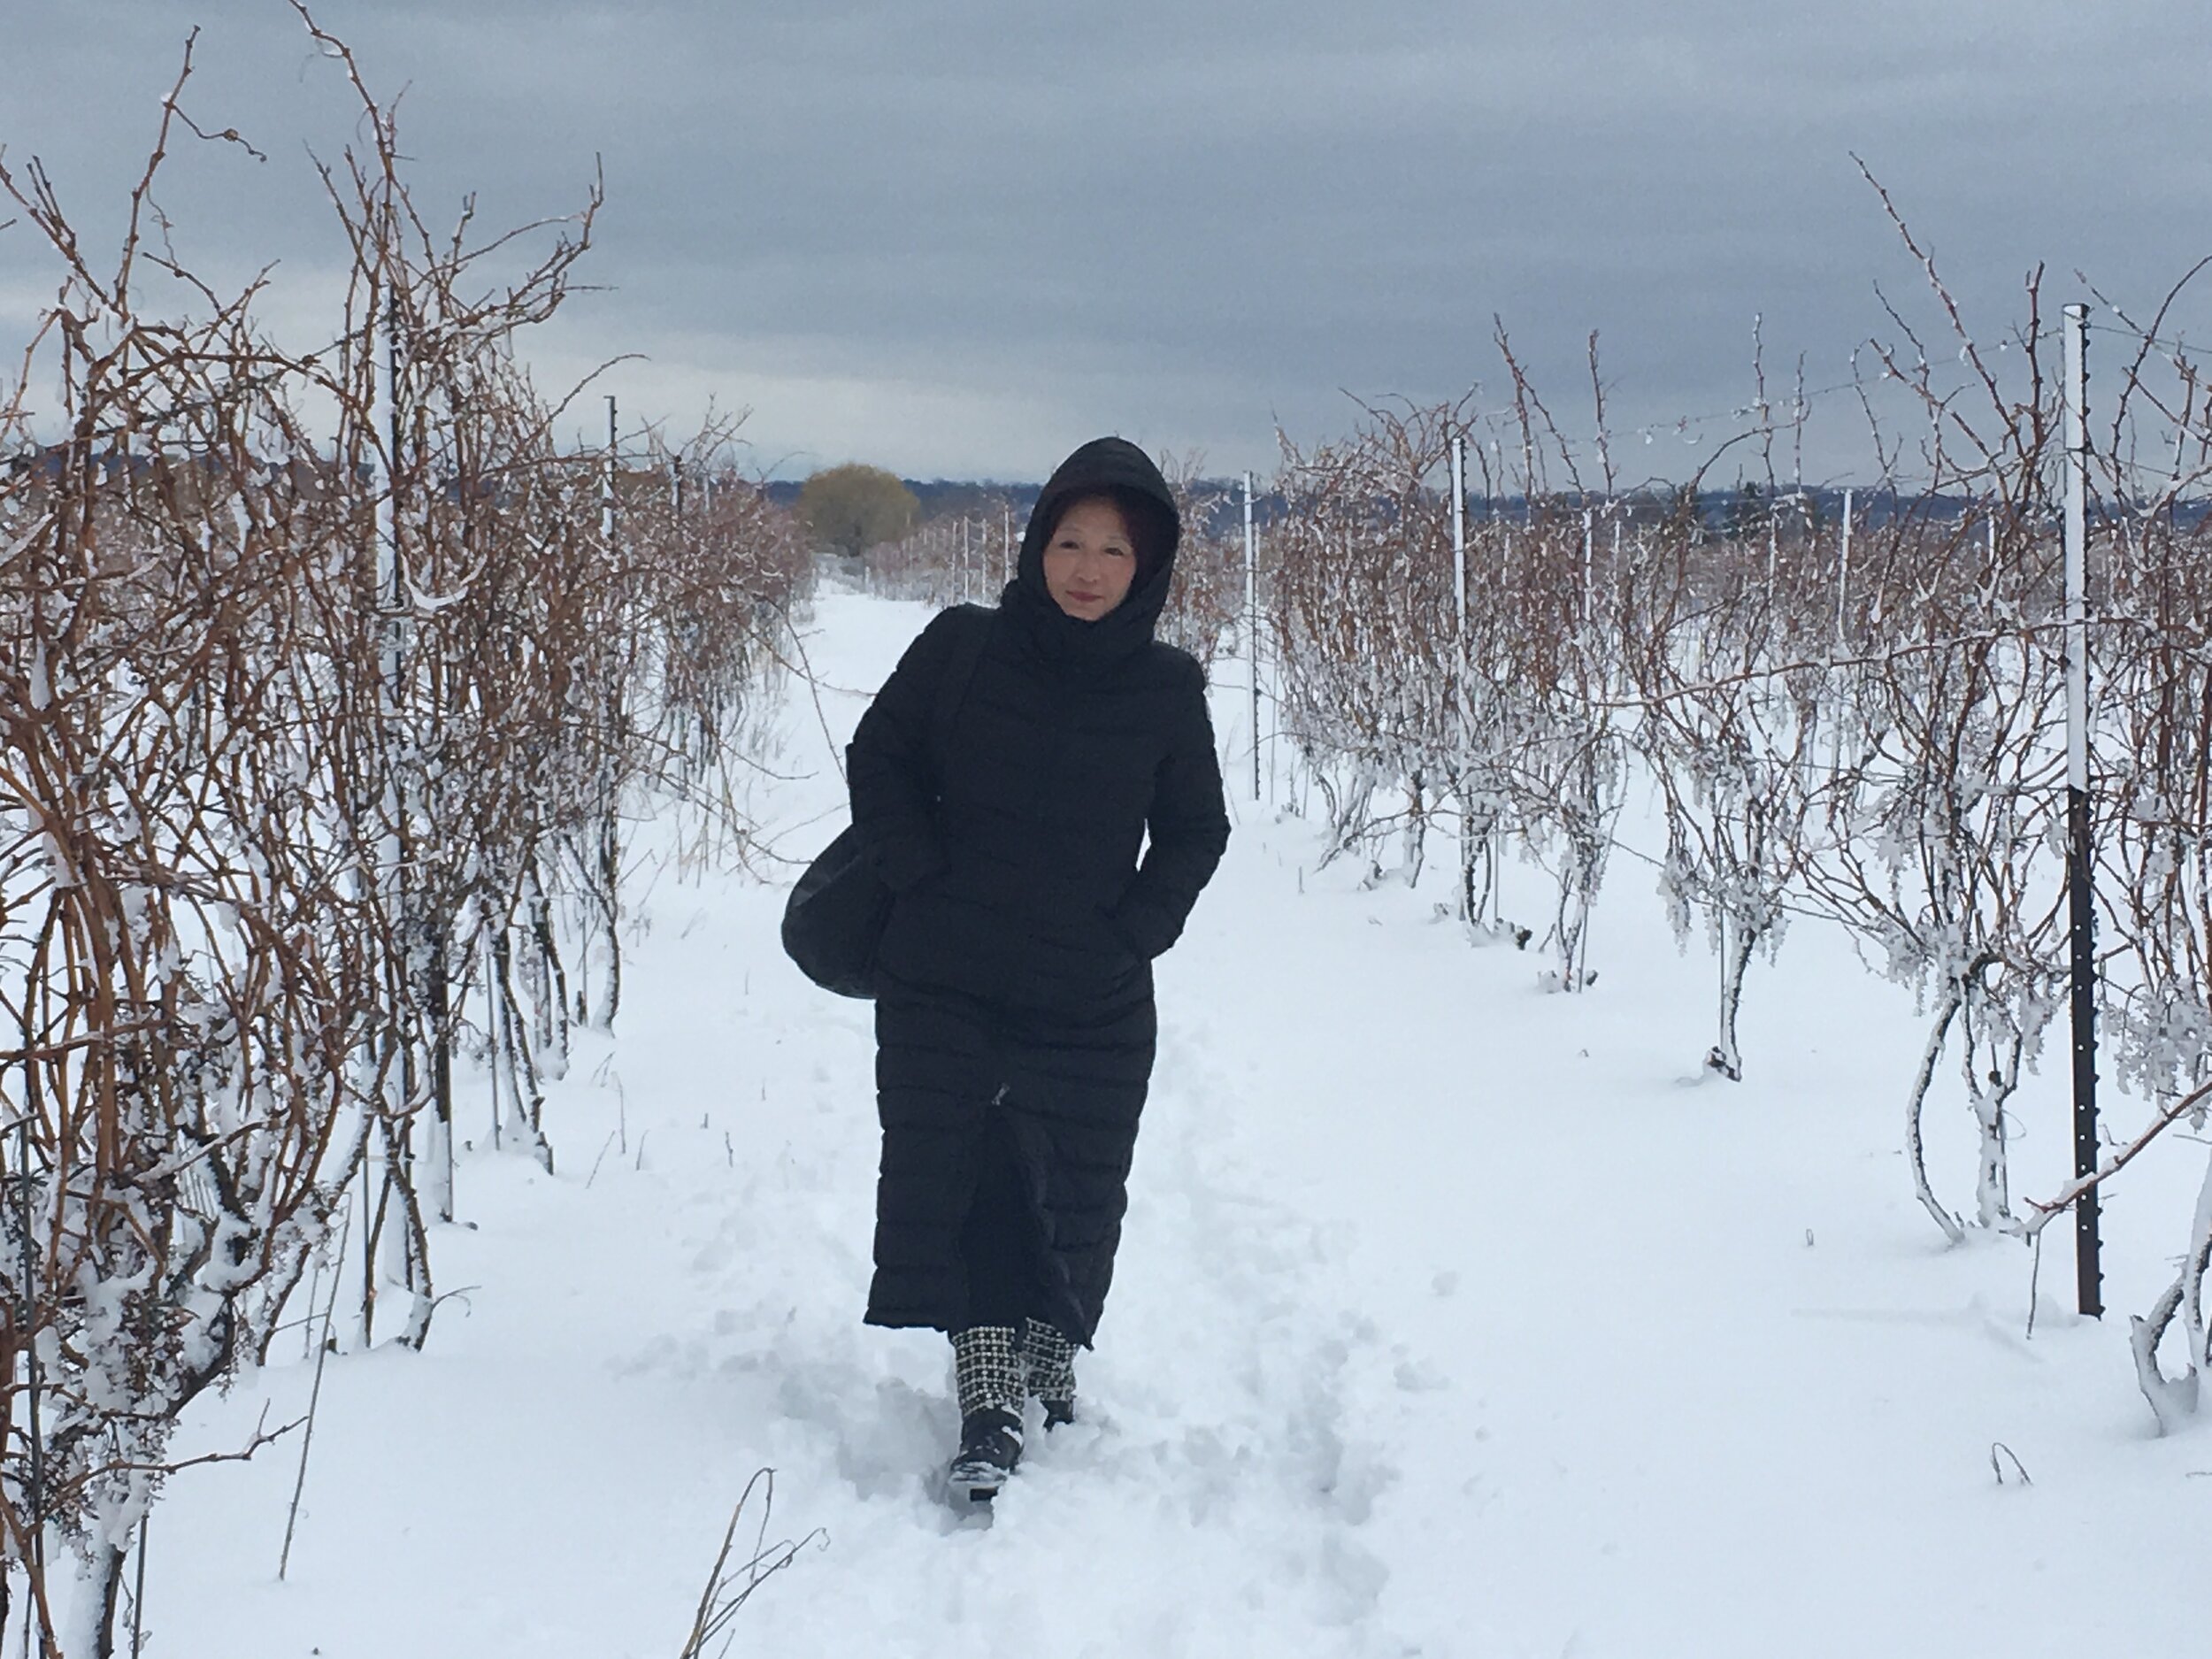 Farmland - Cathy Yang walks through the vineyard at Marynissen Winery, which is owned by her brother.jpg